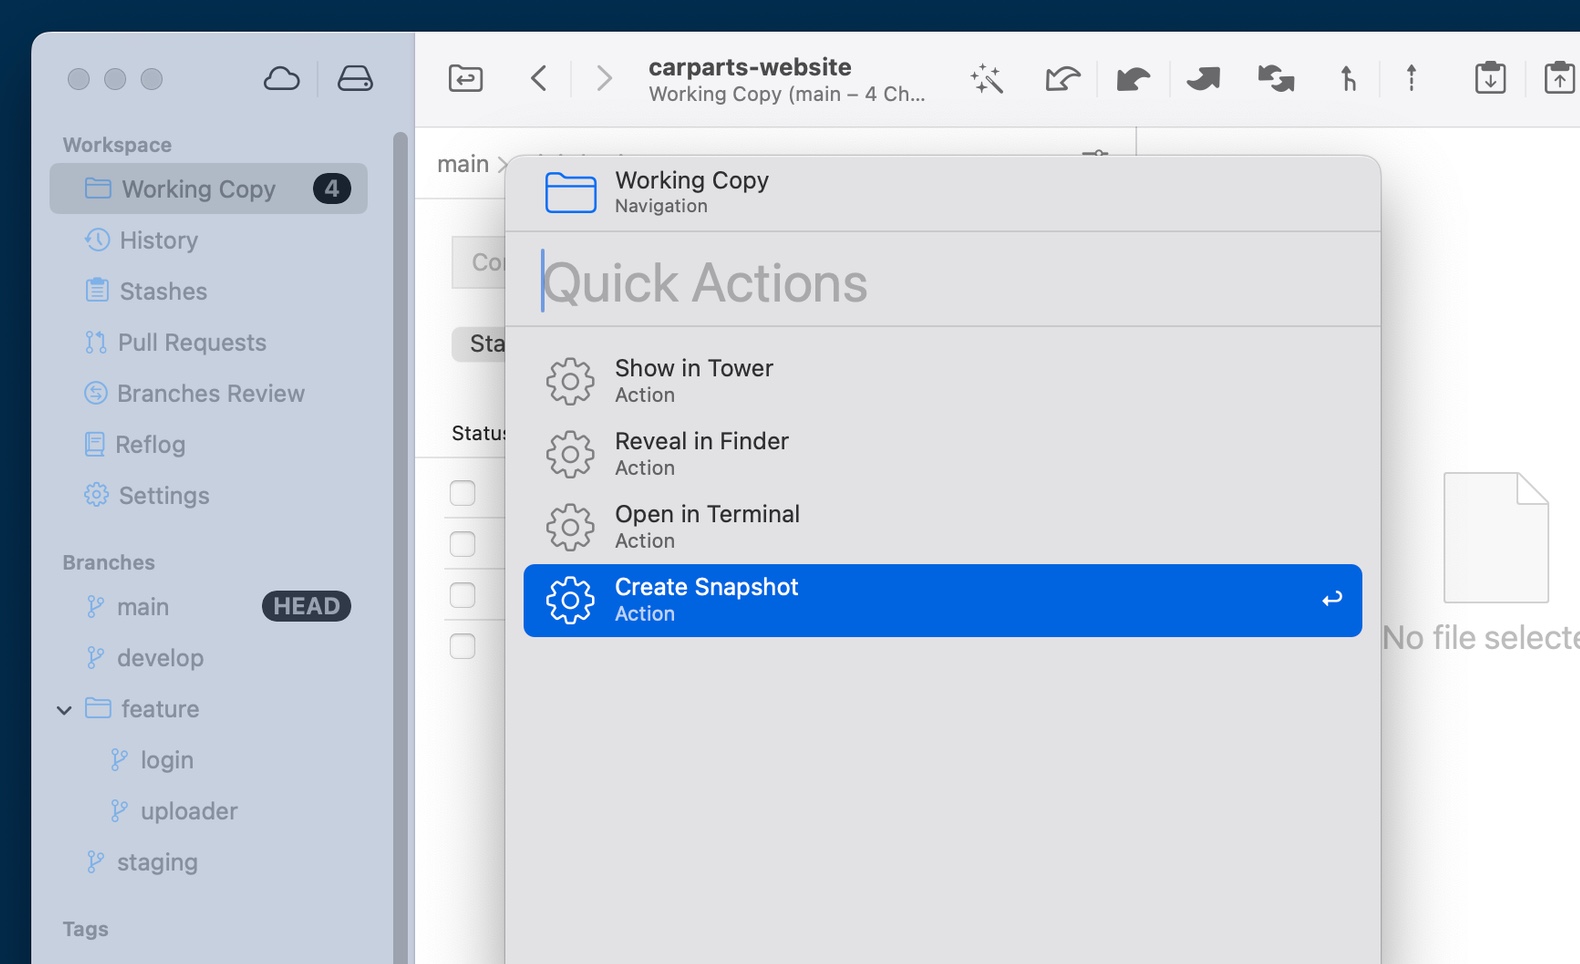 Creating a Snapshot with Quick Actions